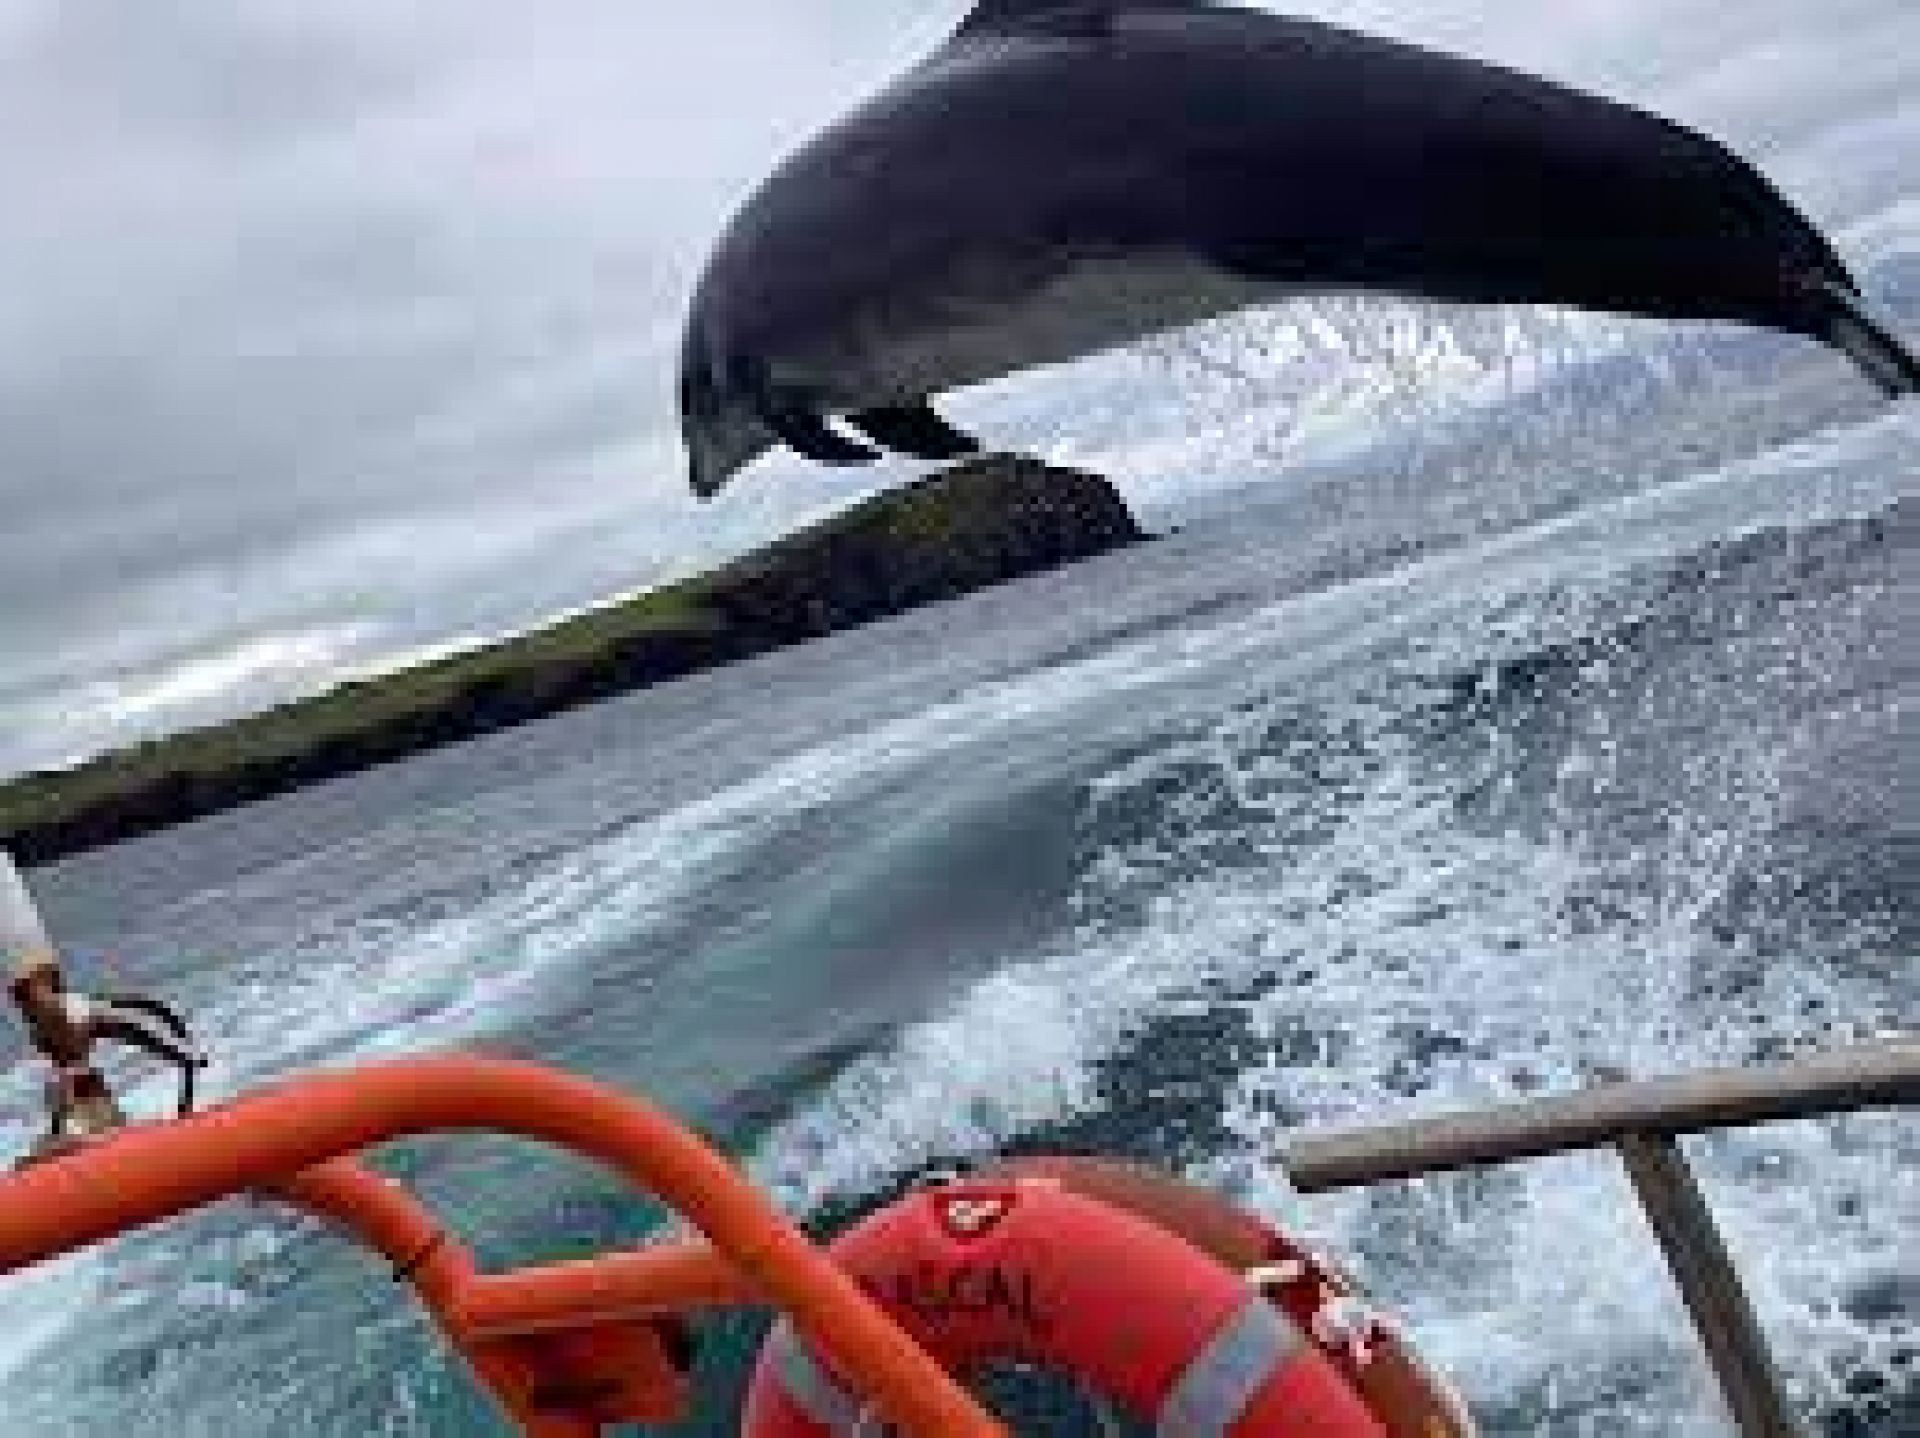 Fungie missing Dingle dolphin